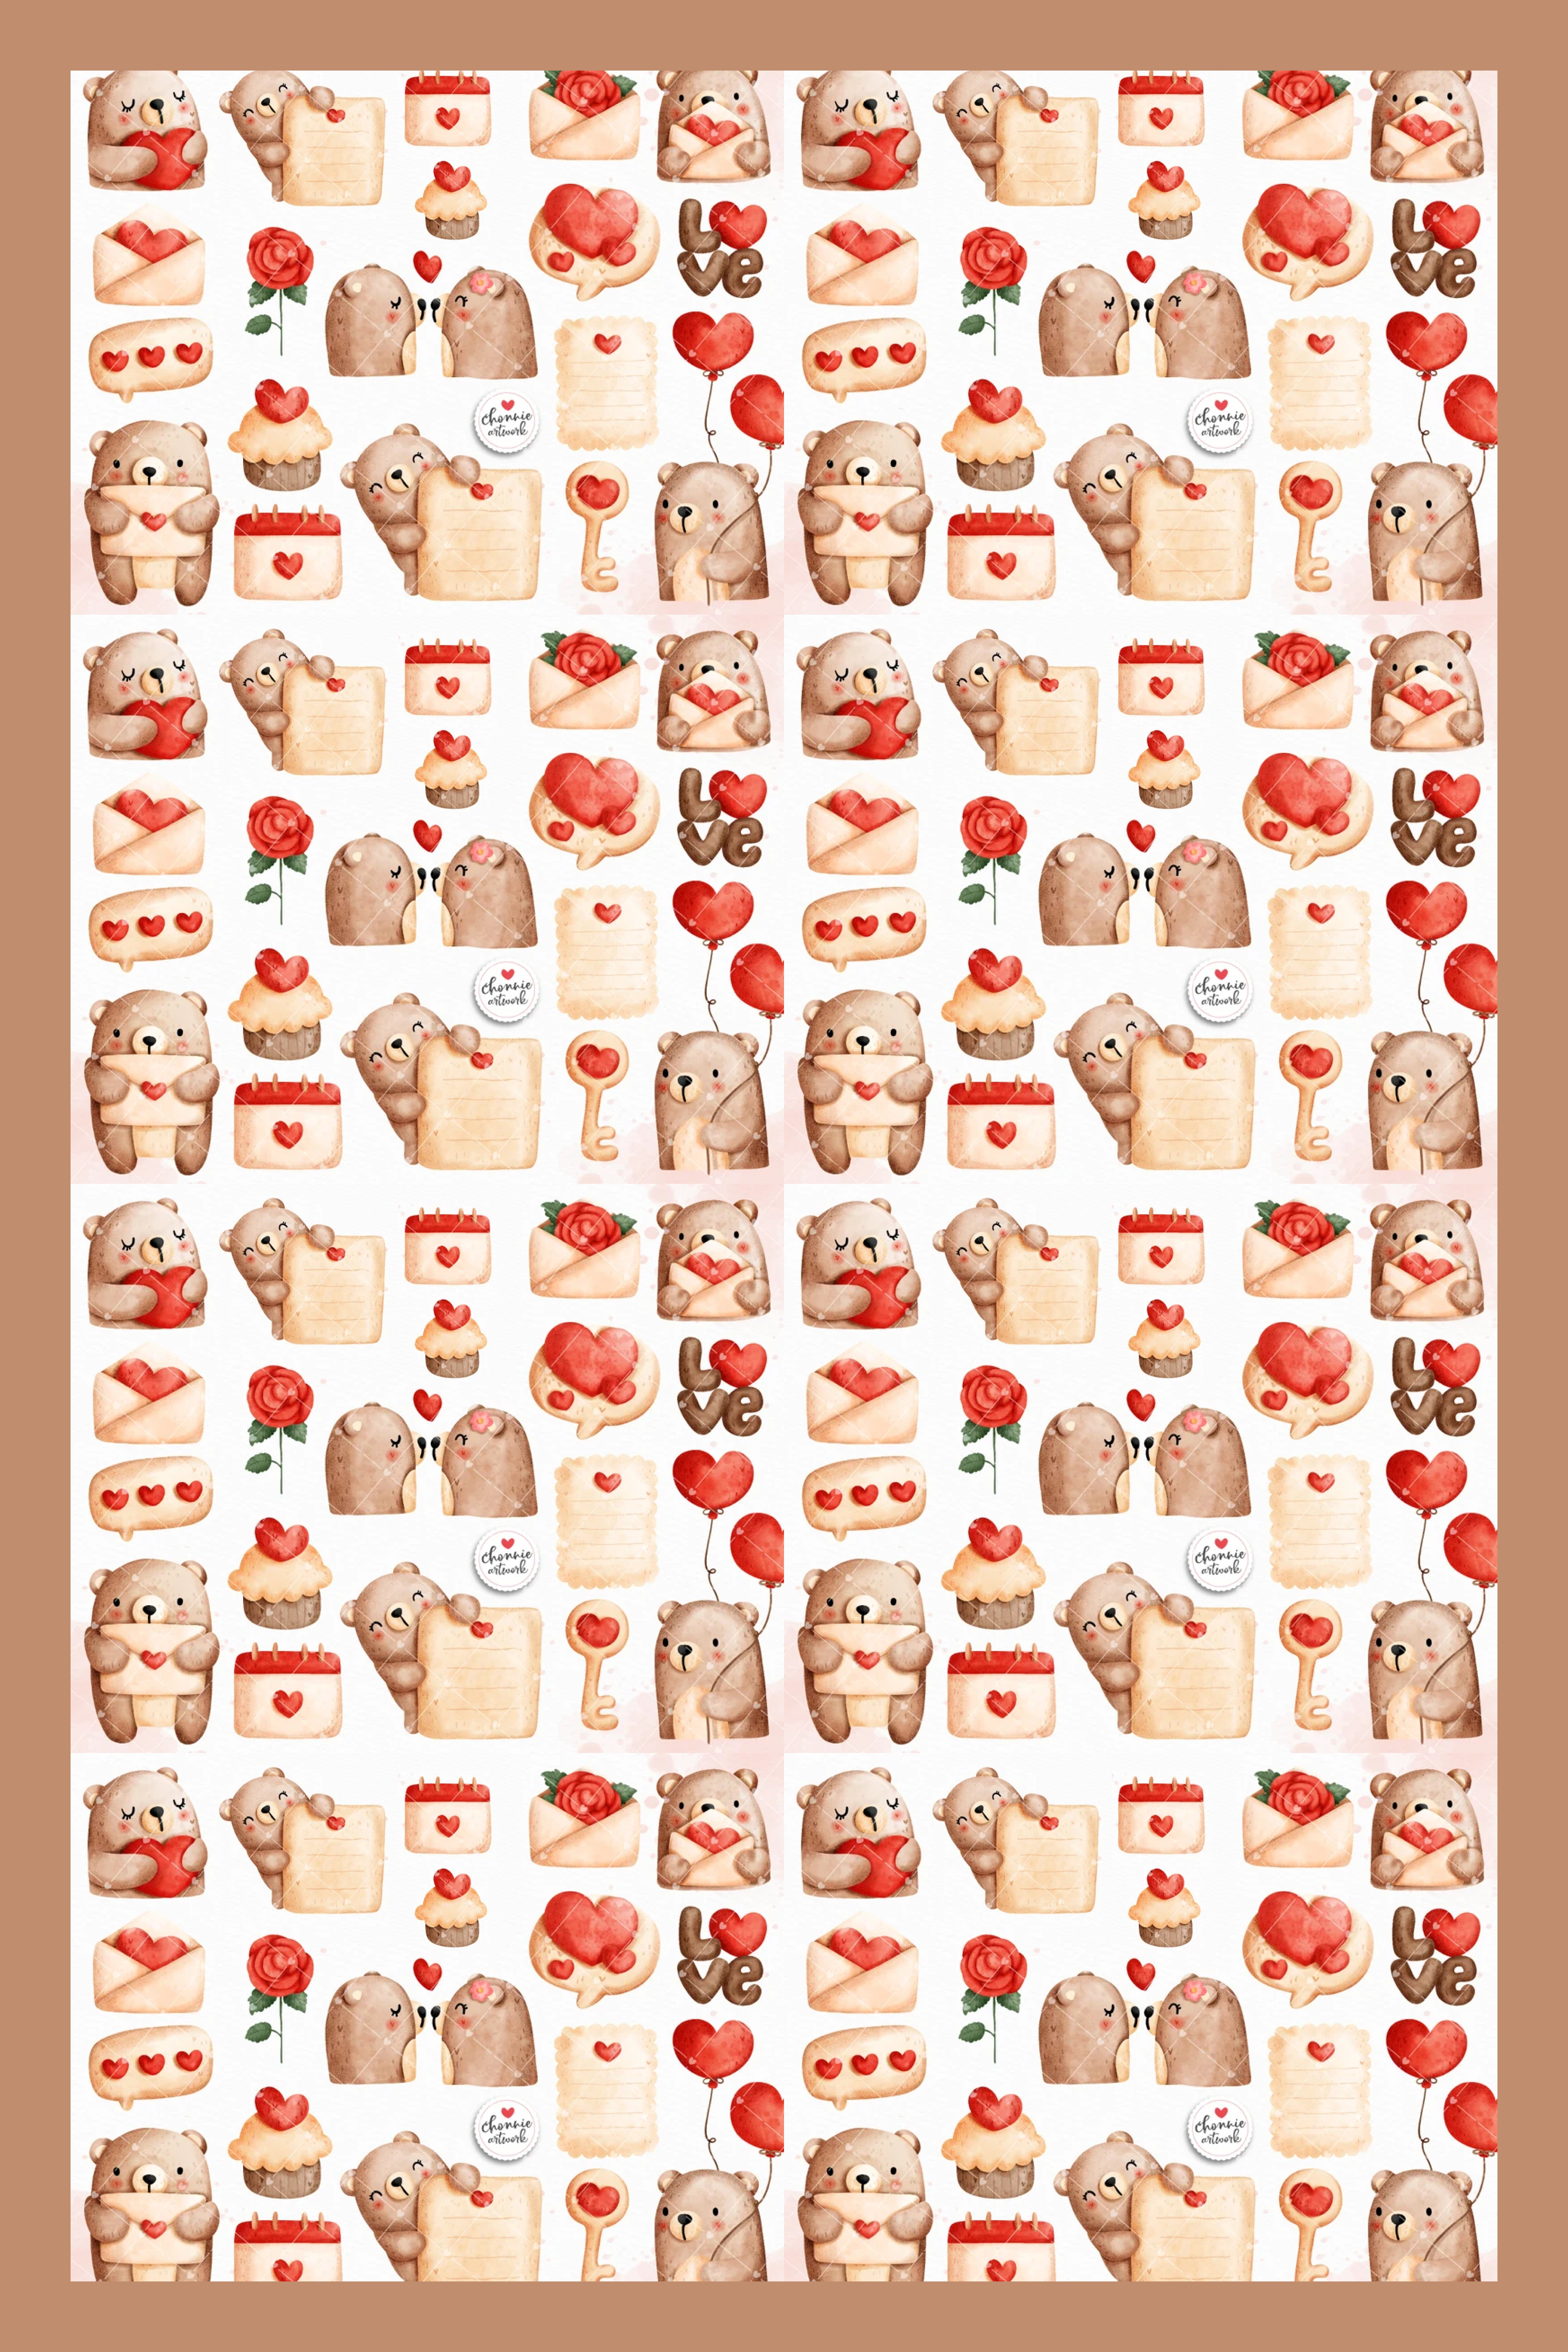 Collage of Teddy bears with red hearts, envelopes and balloons.